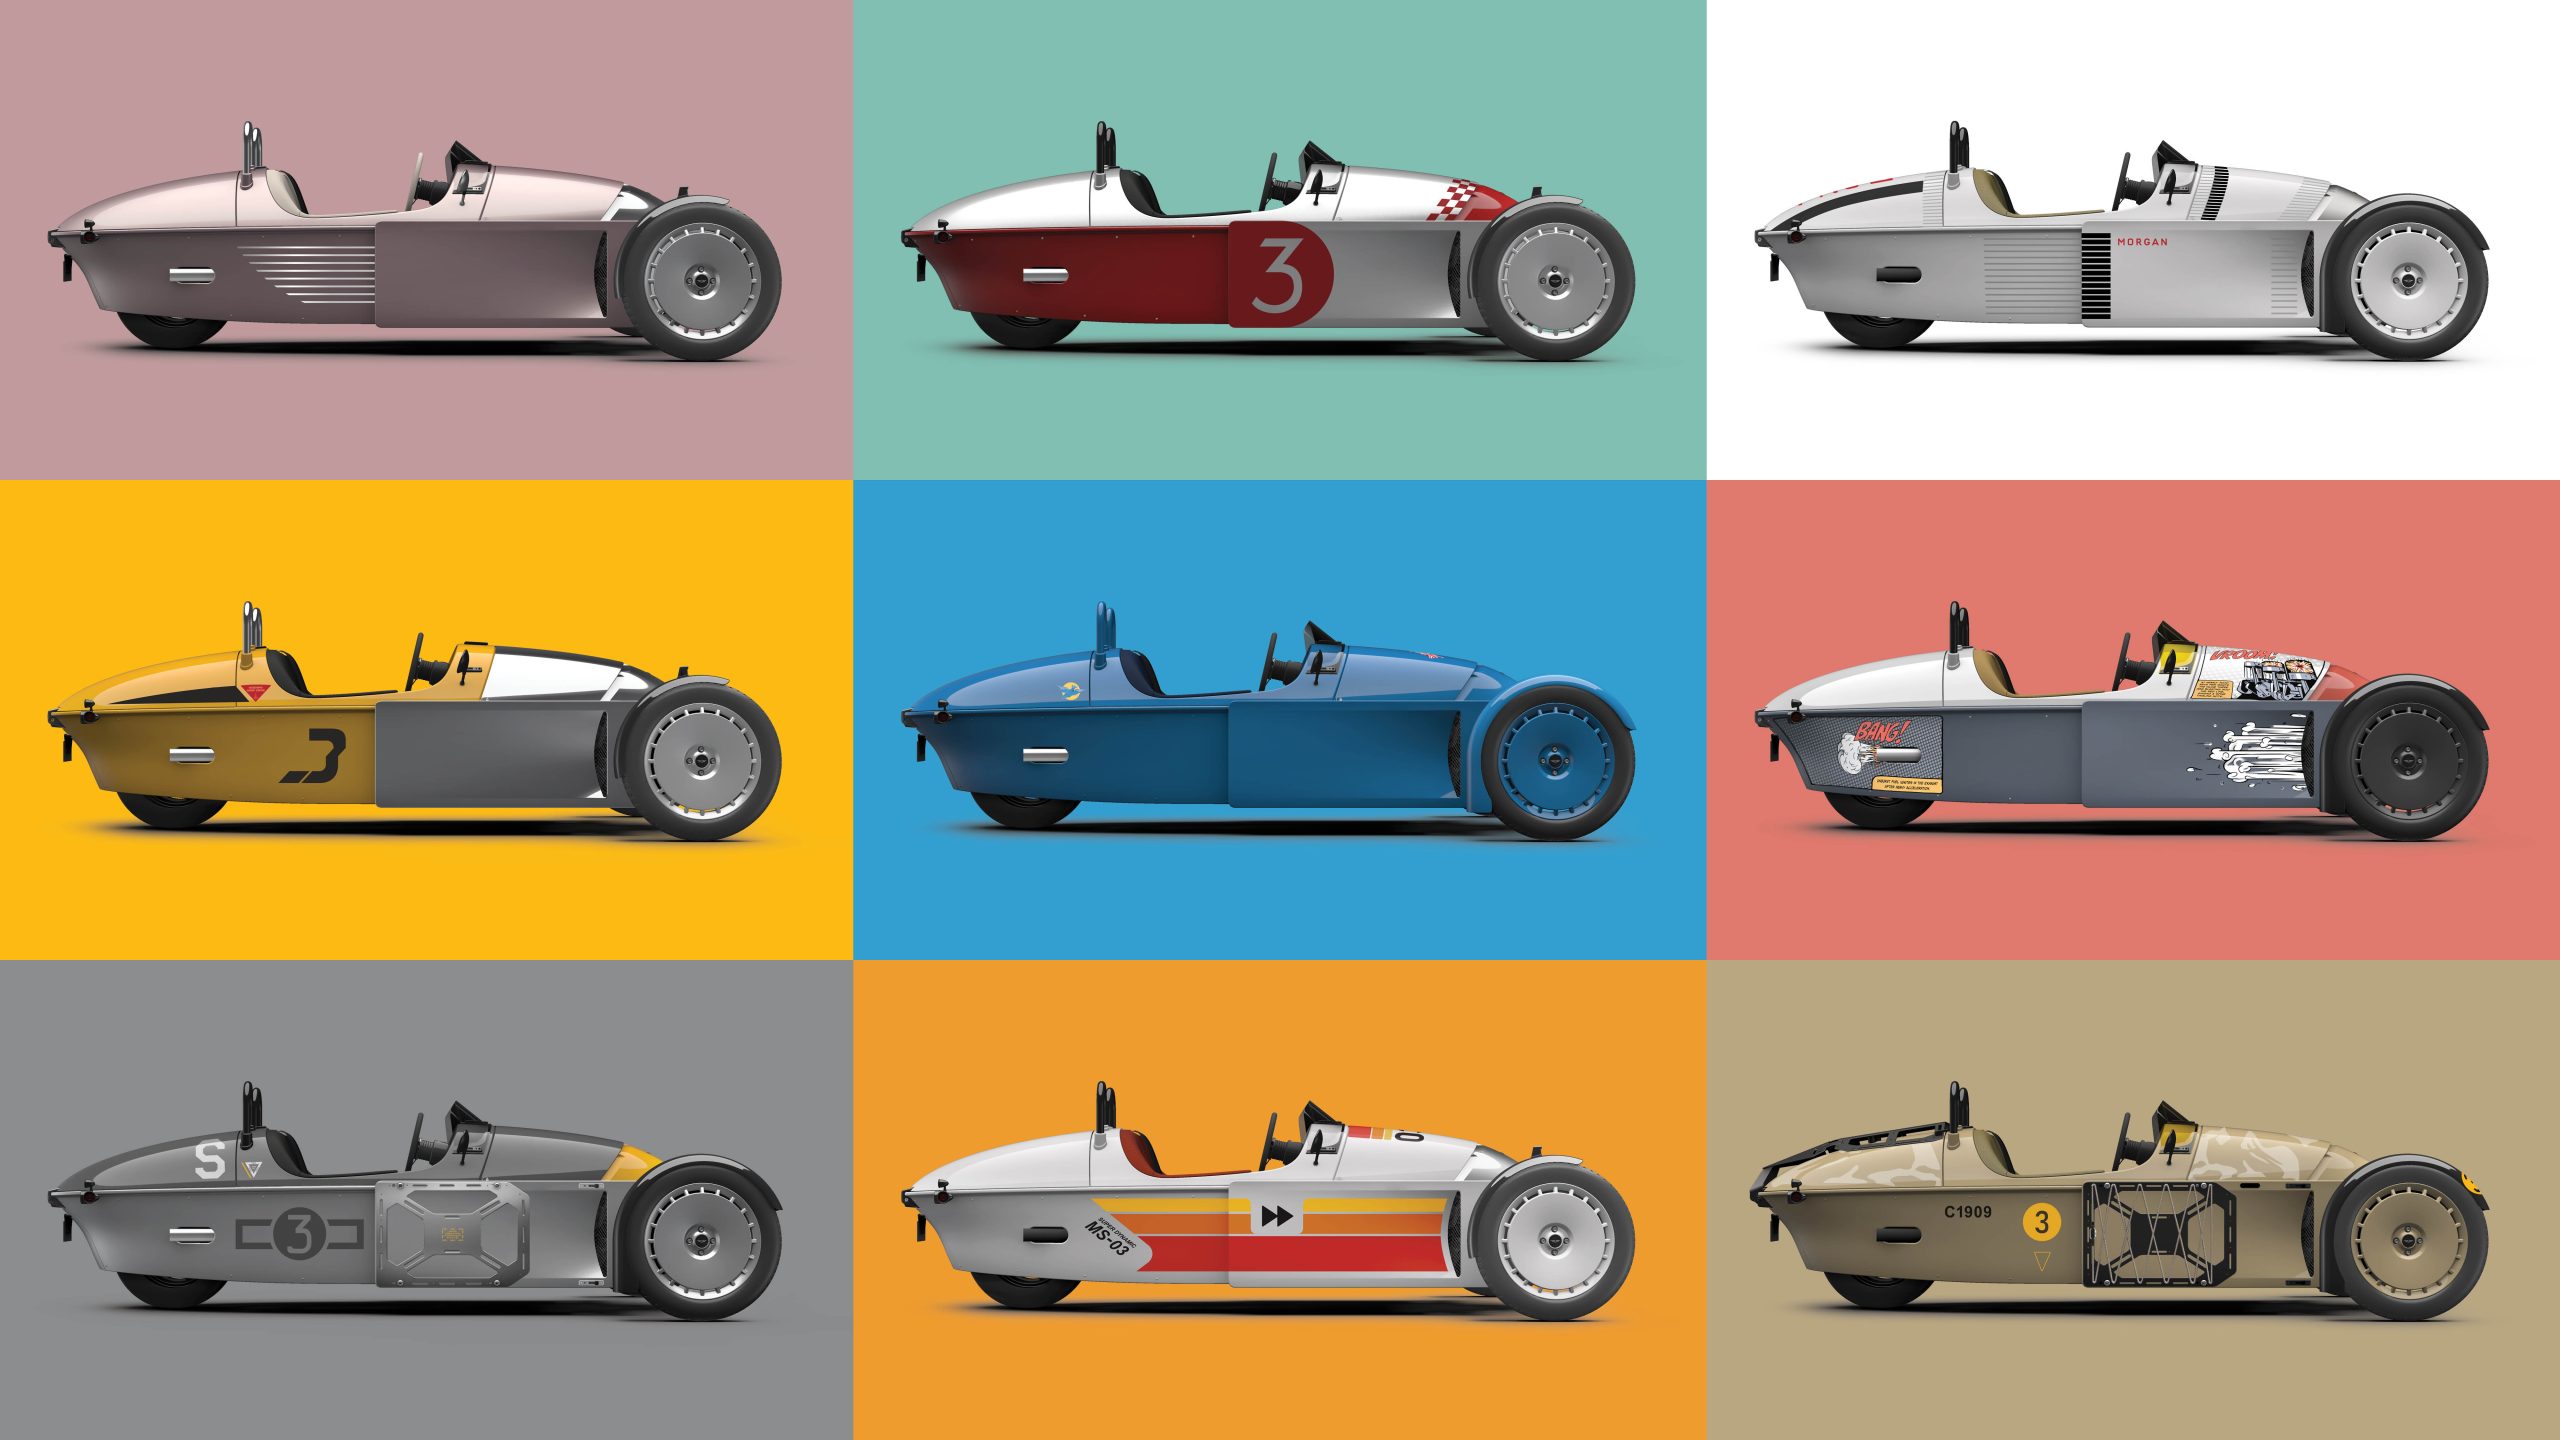 Morgan Shows Inspiration for Super 3 in Limited-Edition Liveries